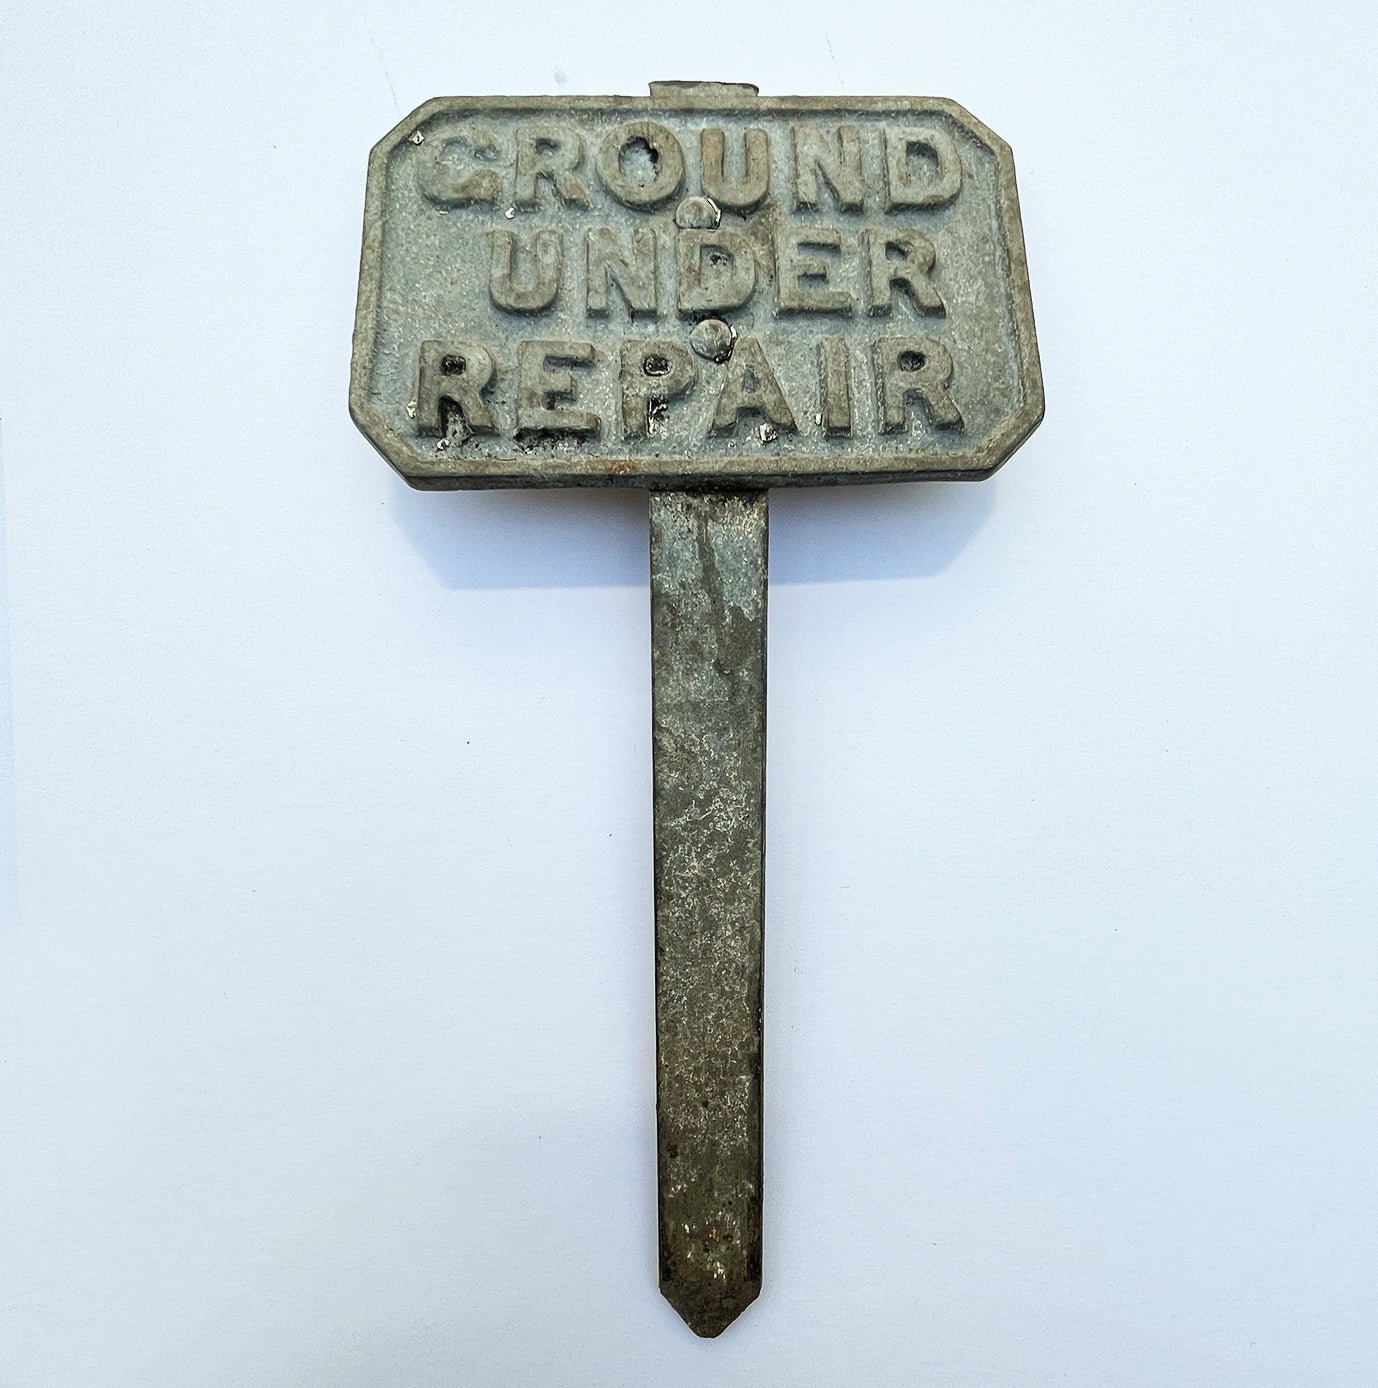 A quality shaped heavy cast galvanised sign reading ‘Ground Under Repair’ survives from the early to middle part of the twentieth century. It more than likely came from a golf course. The perfect gift for the avid gardener - SHOP NOW - www.intovintage.co.uk